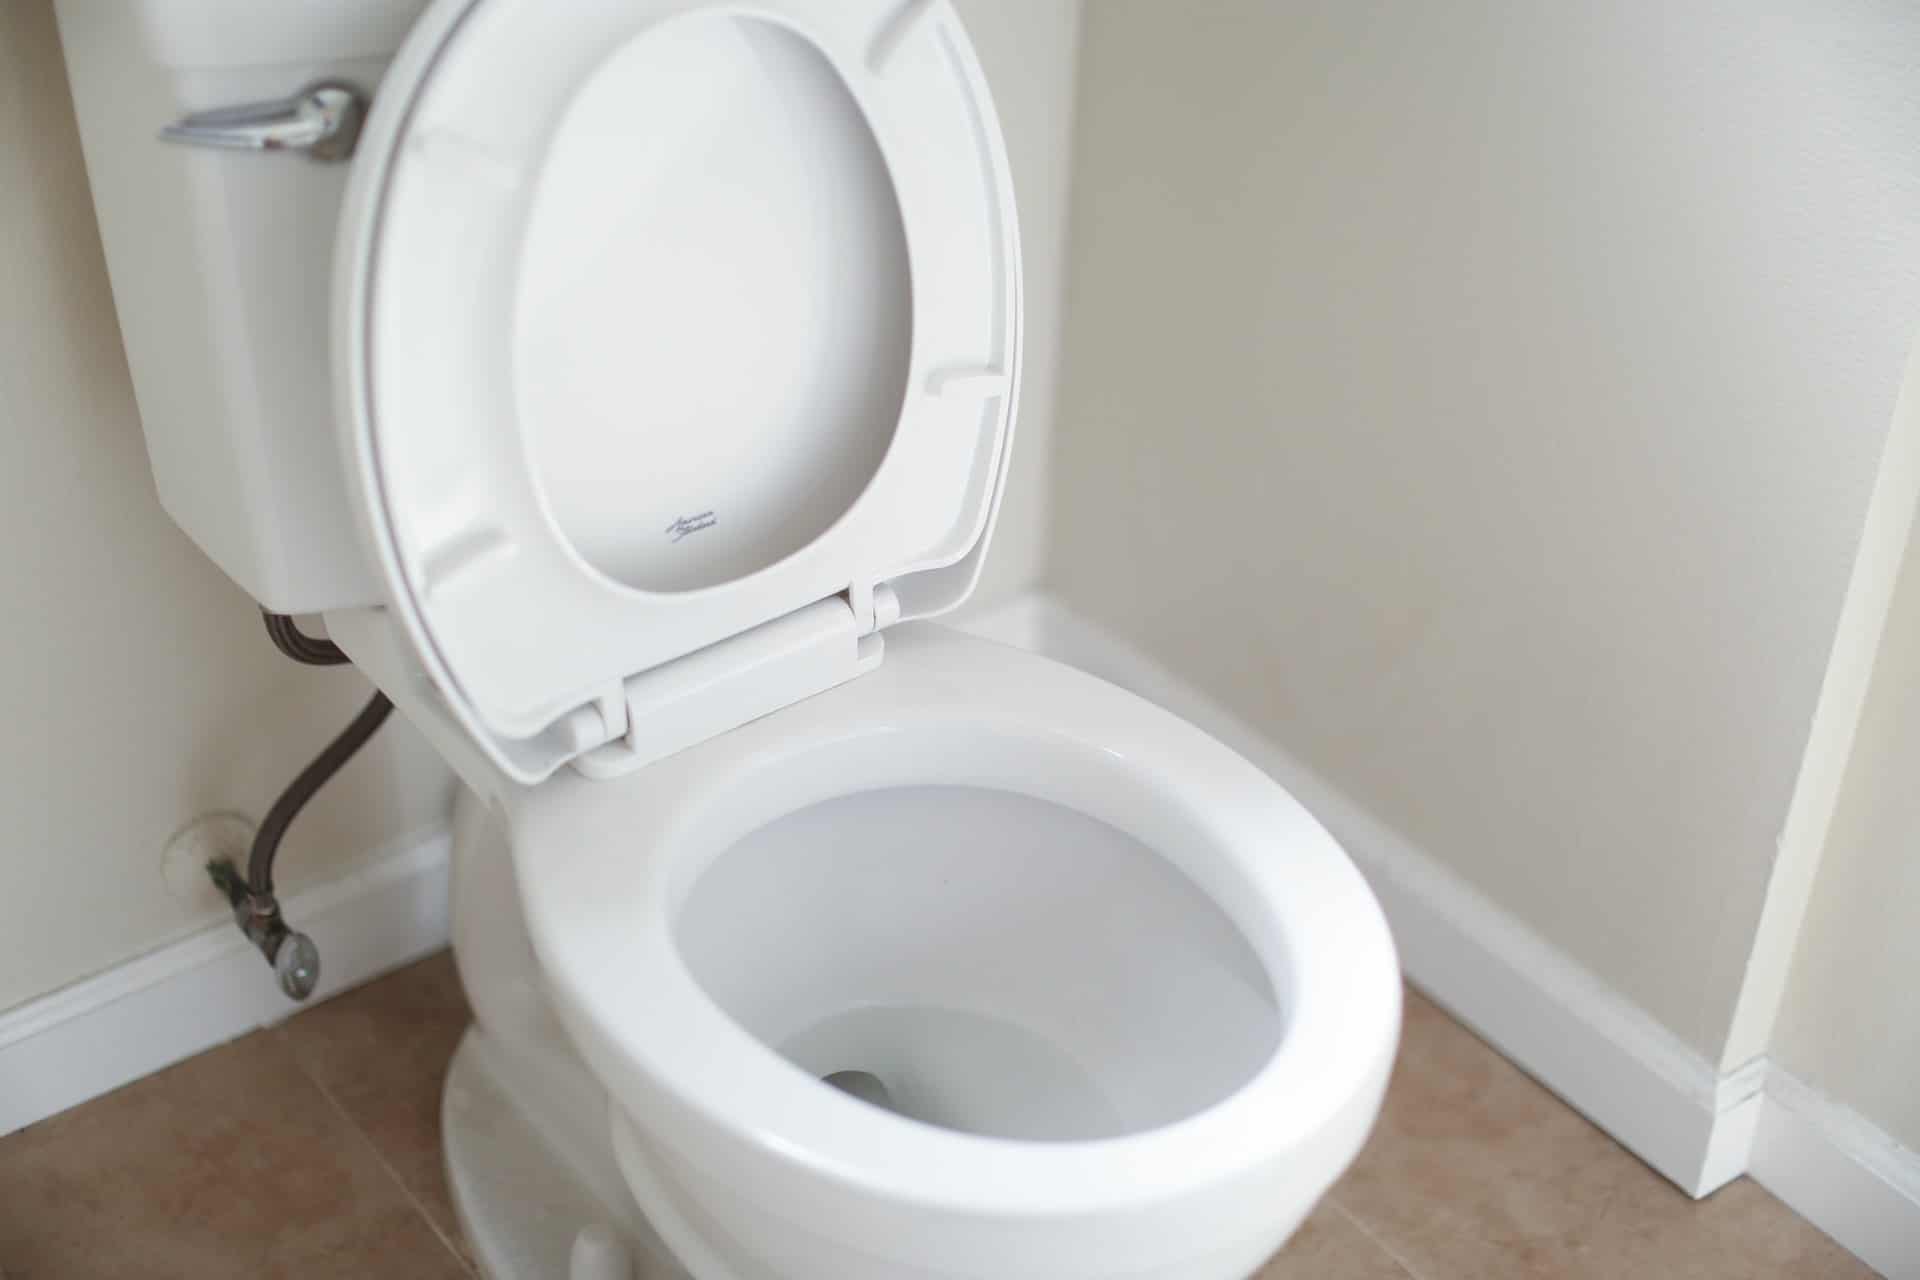 Is It Possible to Find a Universal Toilet Seat?